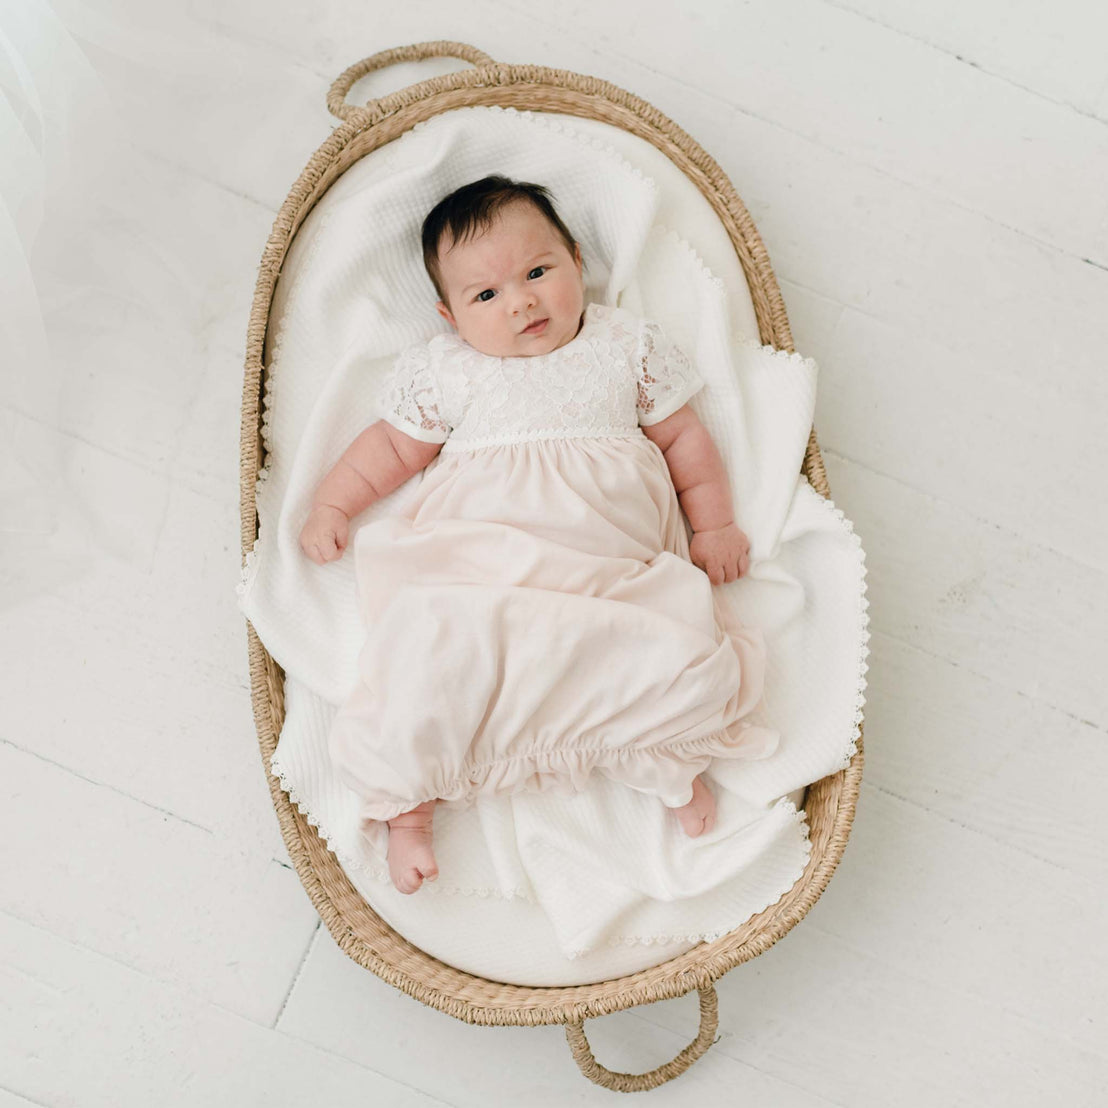 A newborn baby dressed in the Rose Layette & Bonnet lies in an heirloom woven oval bassinet on a white floor, looking directly at the camera.